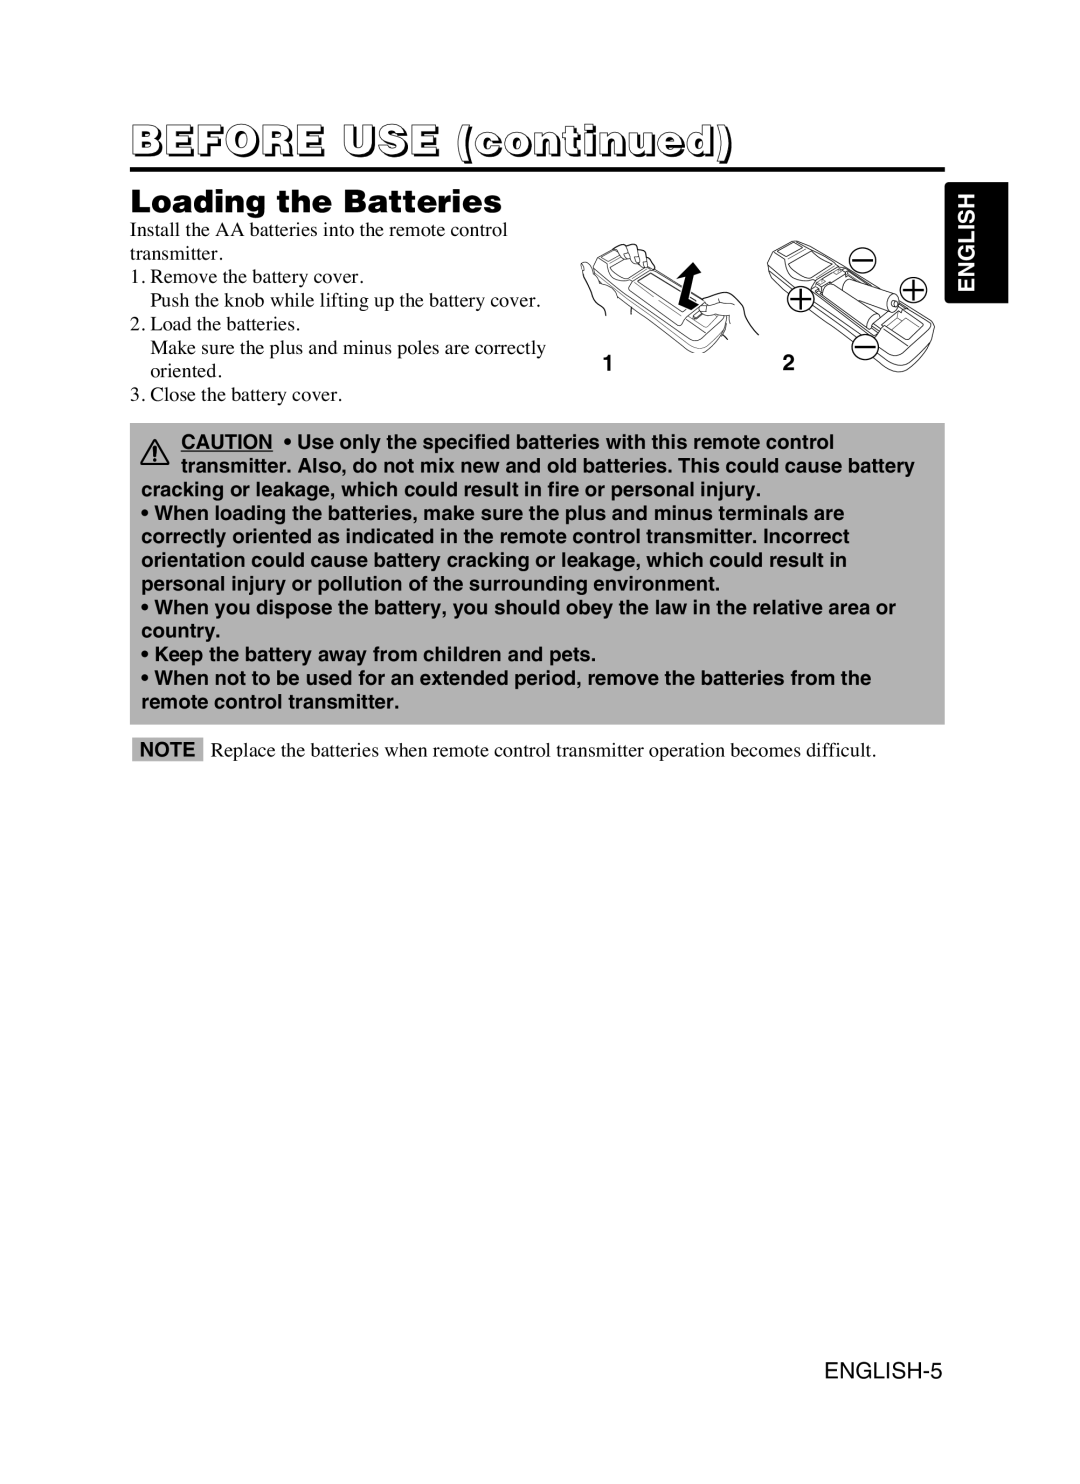 Dukane 8053 user manual Loading the Batteries, BEFORE USE continued, English, ENGLISH-5 